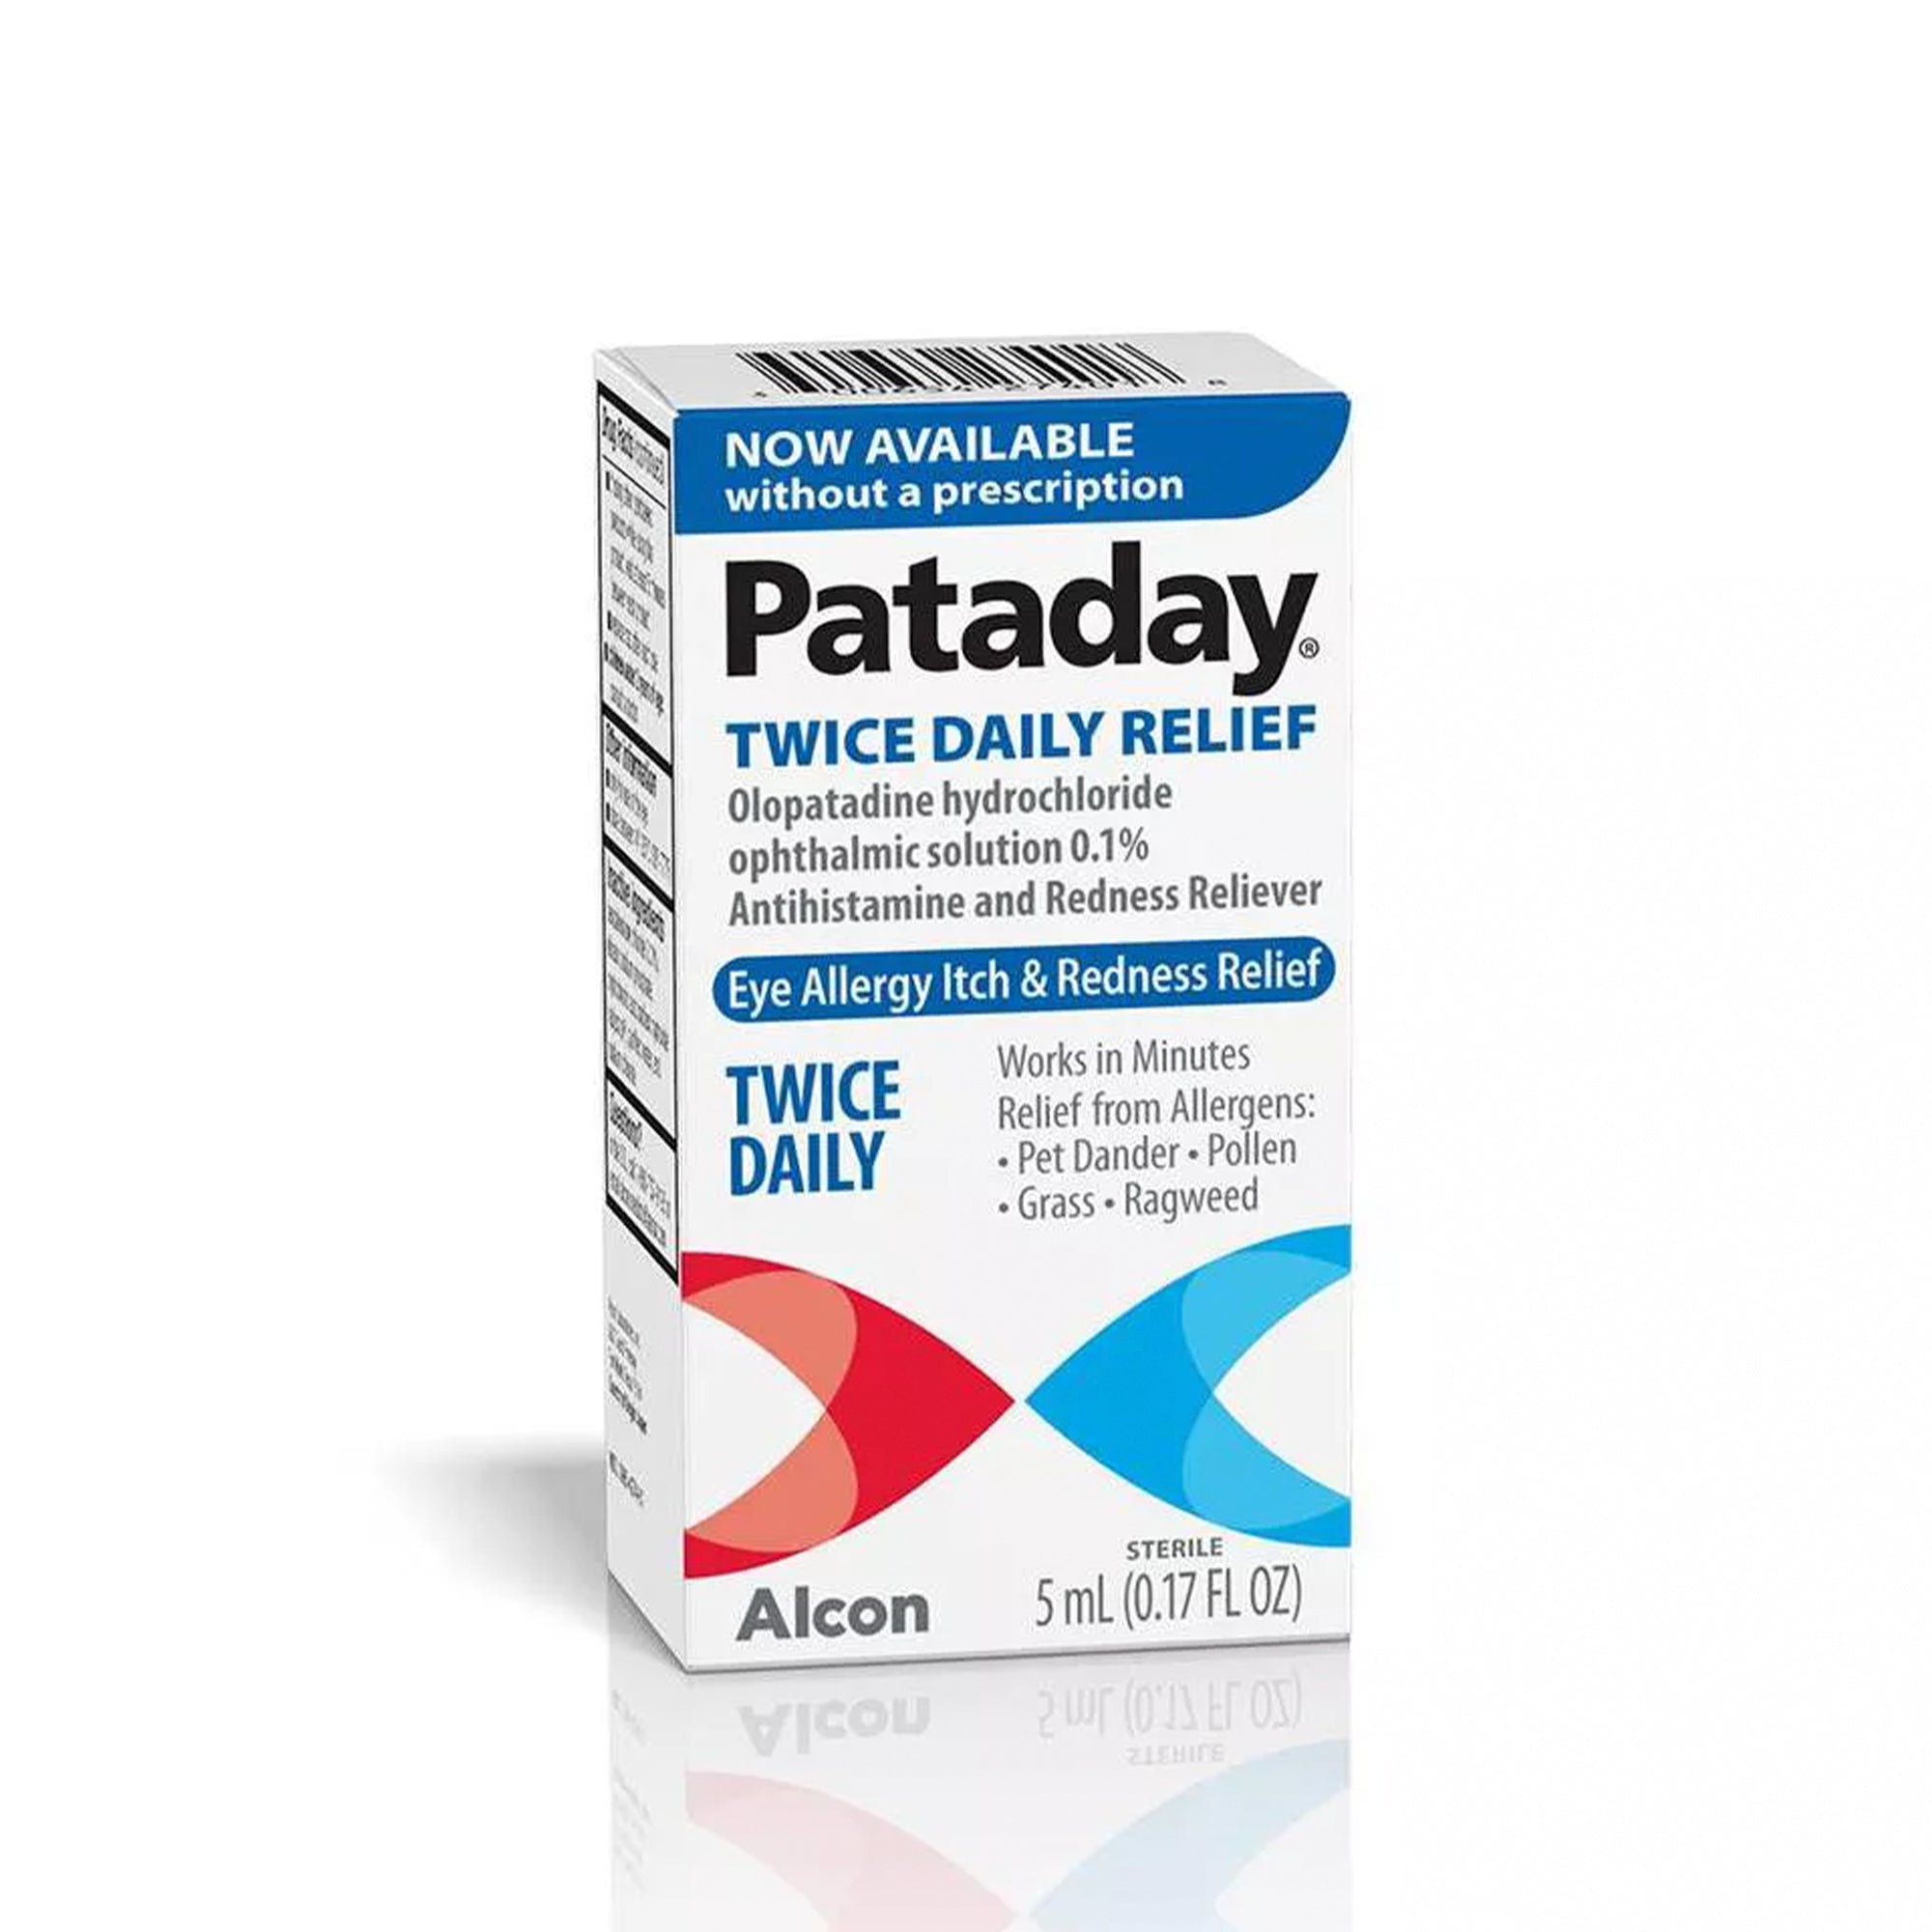 Pataday Twice Daily Eye Allergy Itch and Redness Relief Drops, 0.17 fl oz